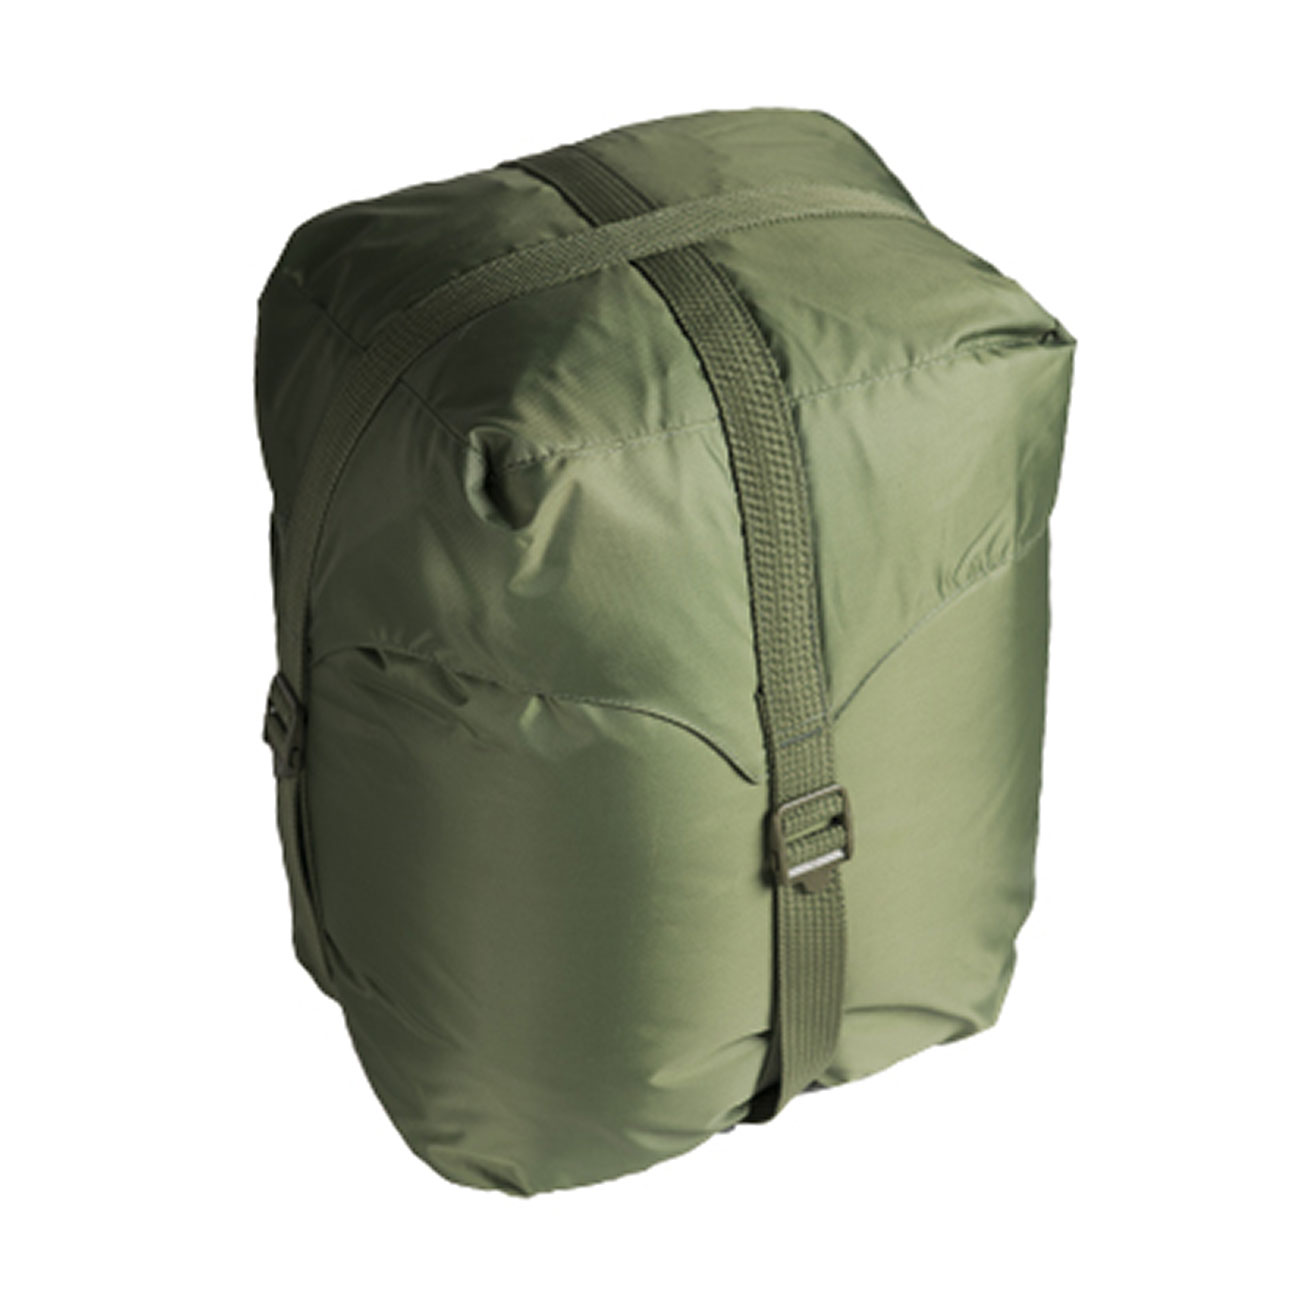 Mil-Tec Schlafsack Tactical 4 Oliv Outdoor Survival Campingschlafsack 230x80cm 